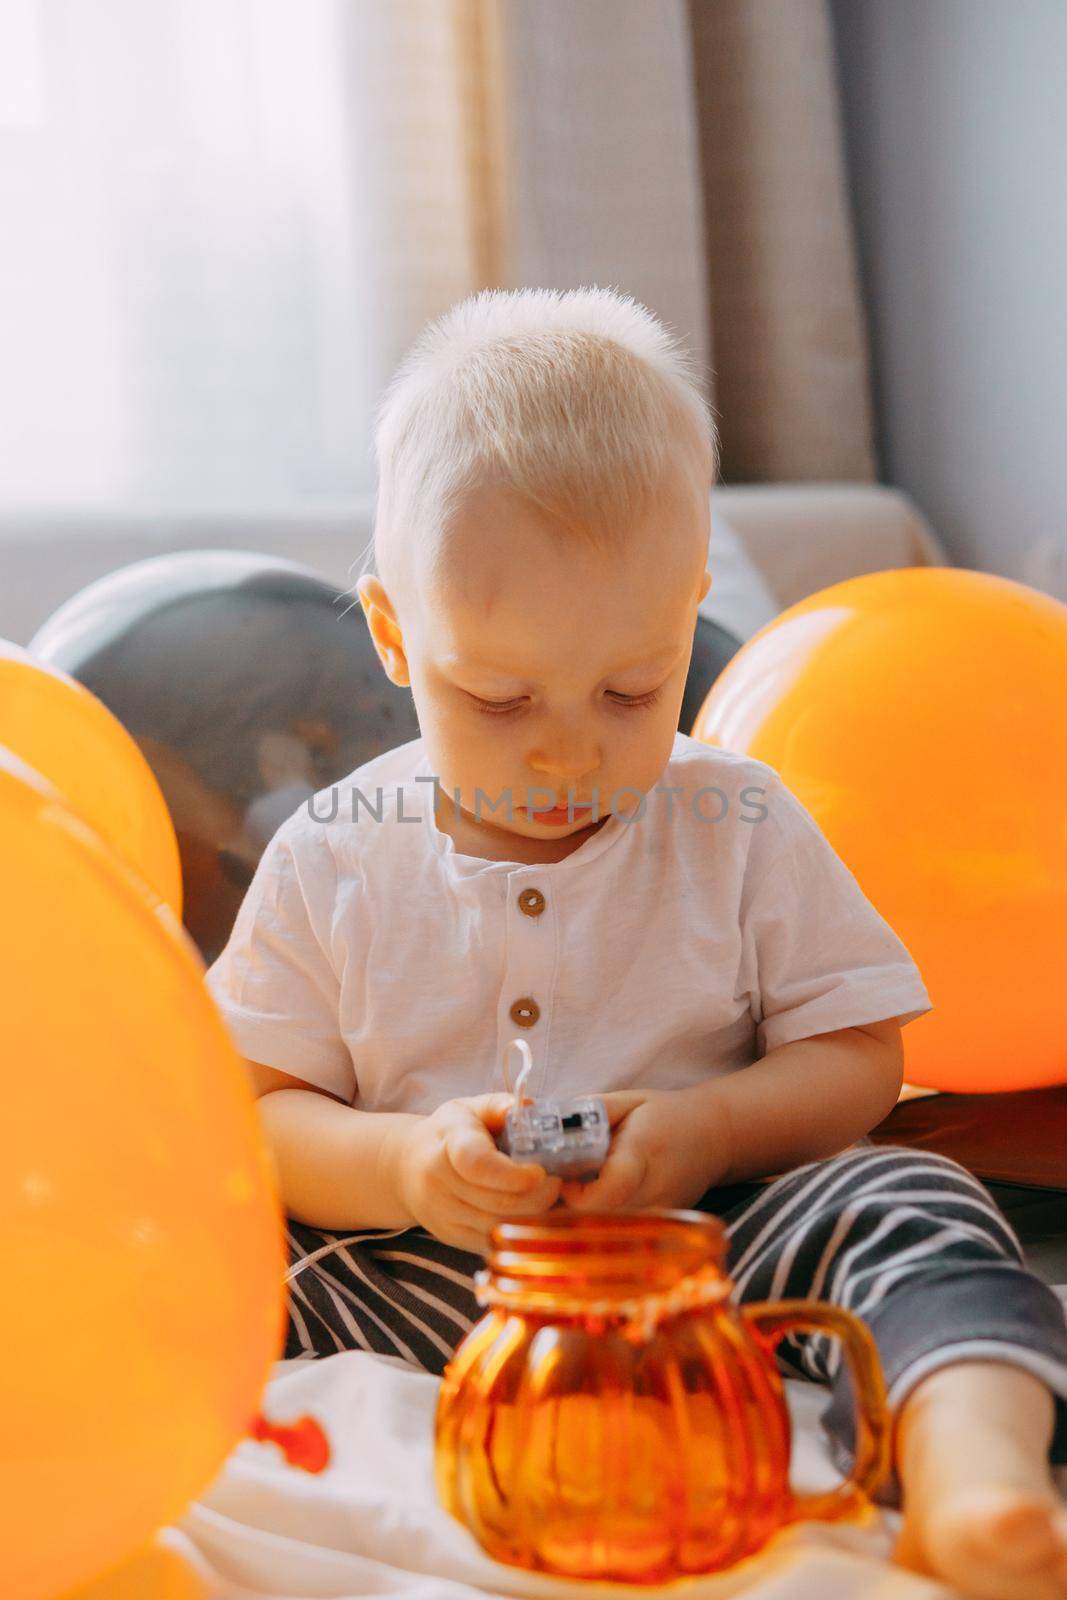 Children's Halloween - a boy in a carnival costume with orange and black balloons at home. Ready to celebrate Halloween by Annu1tochka